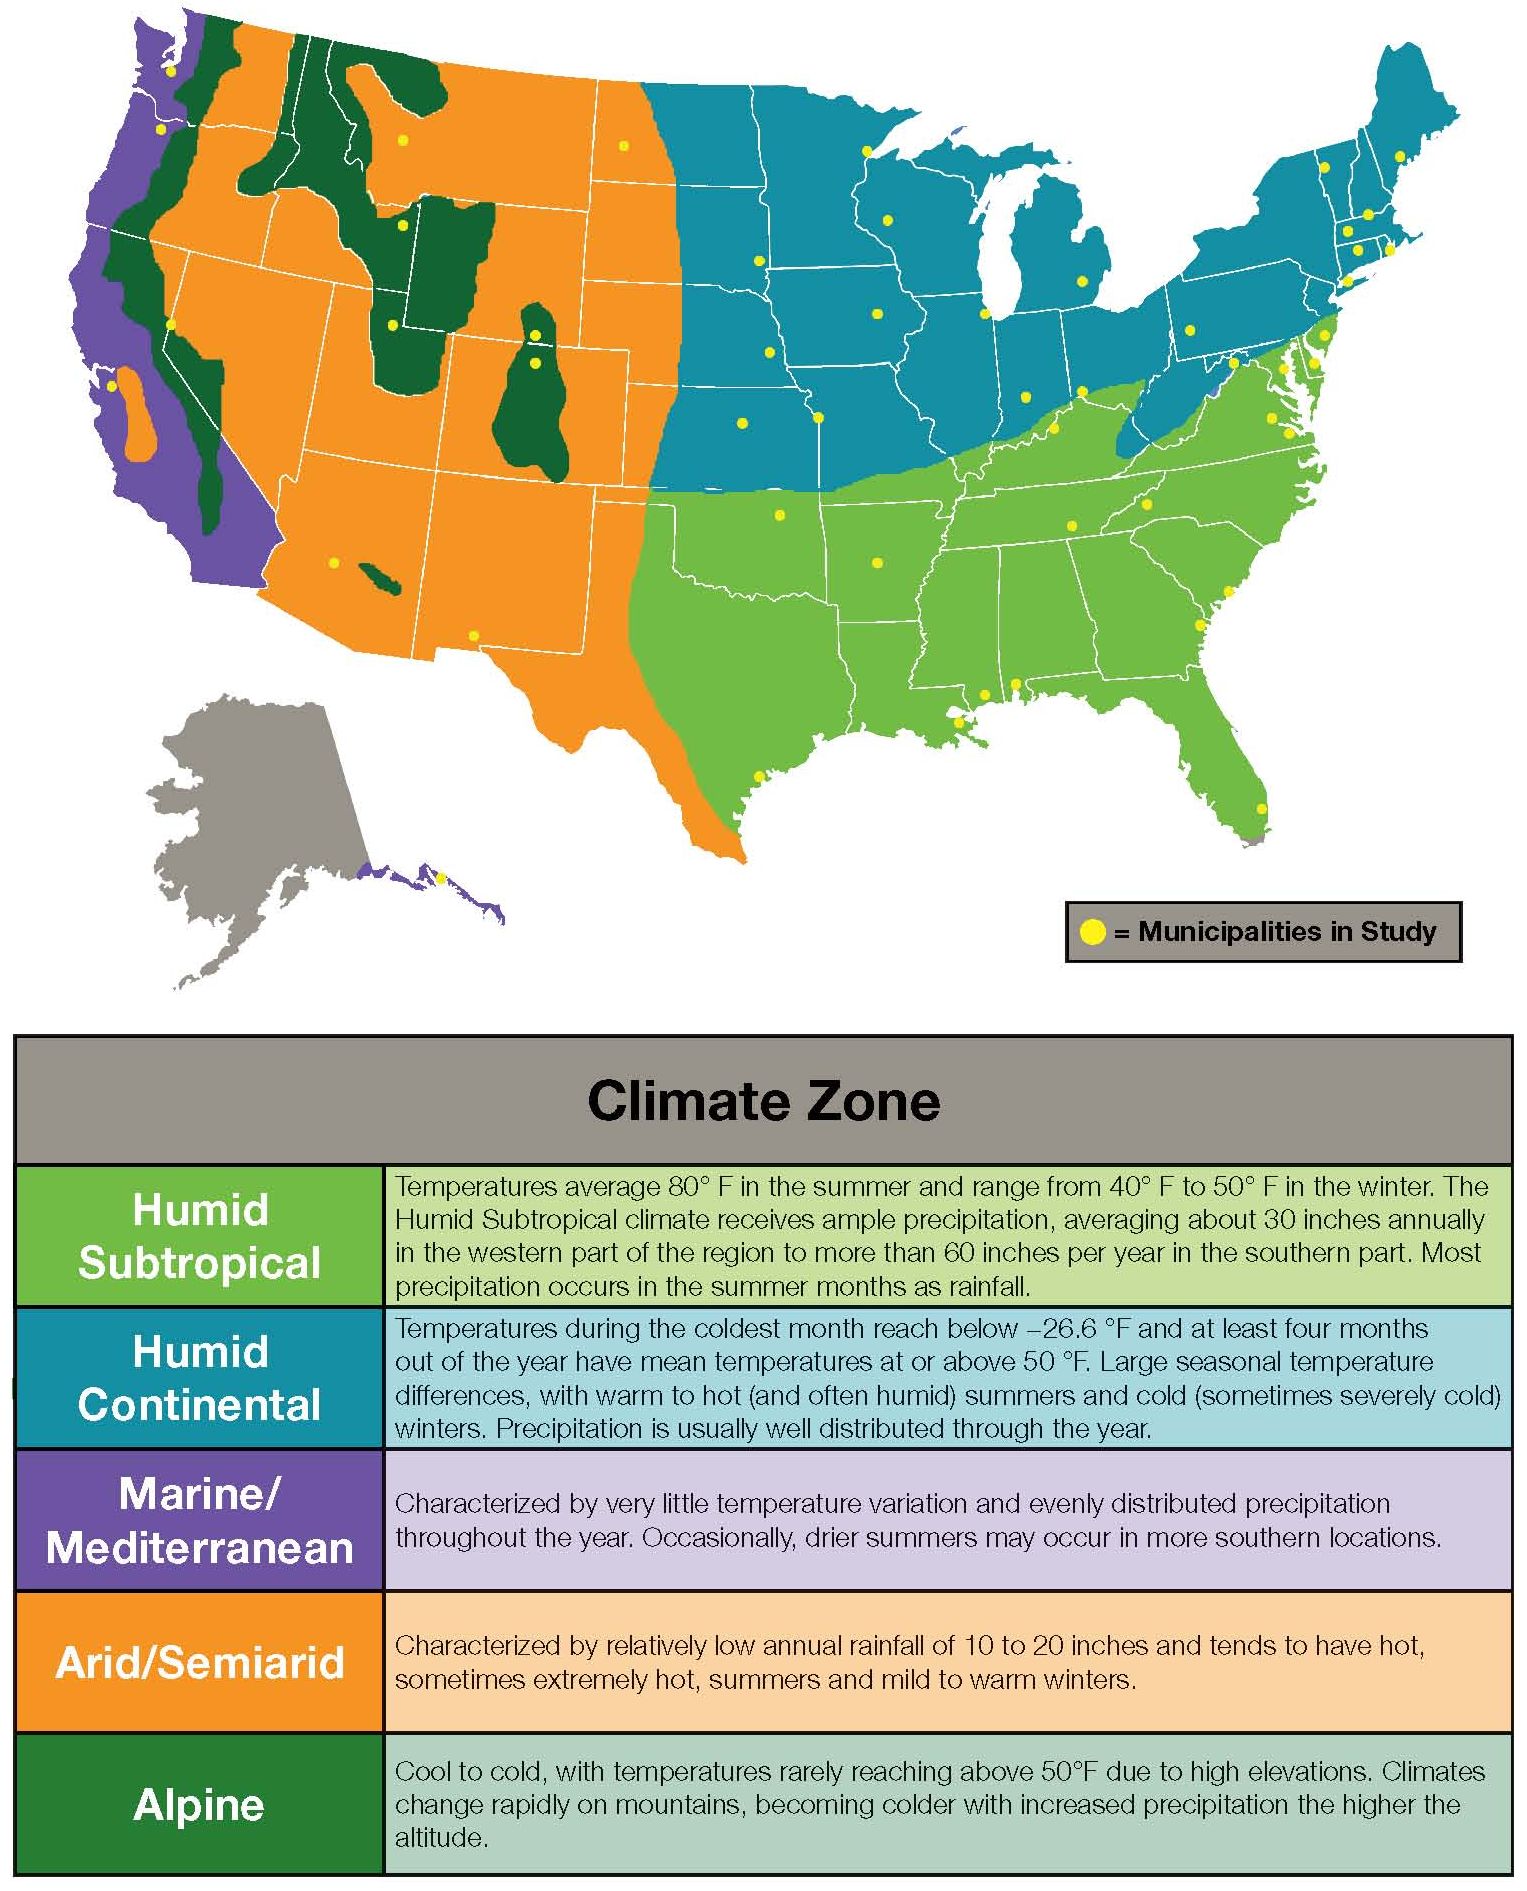 nahb_green-infrastructure-survey_2016_climate-zones